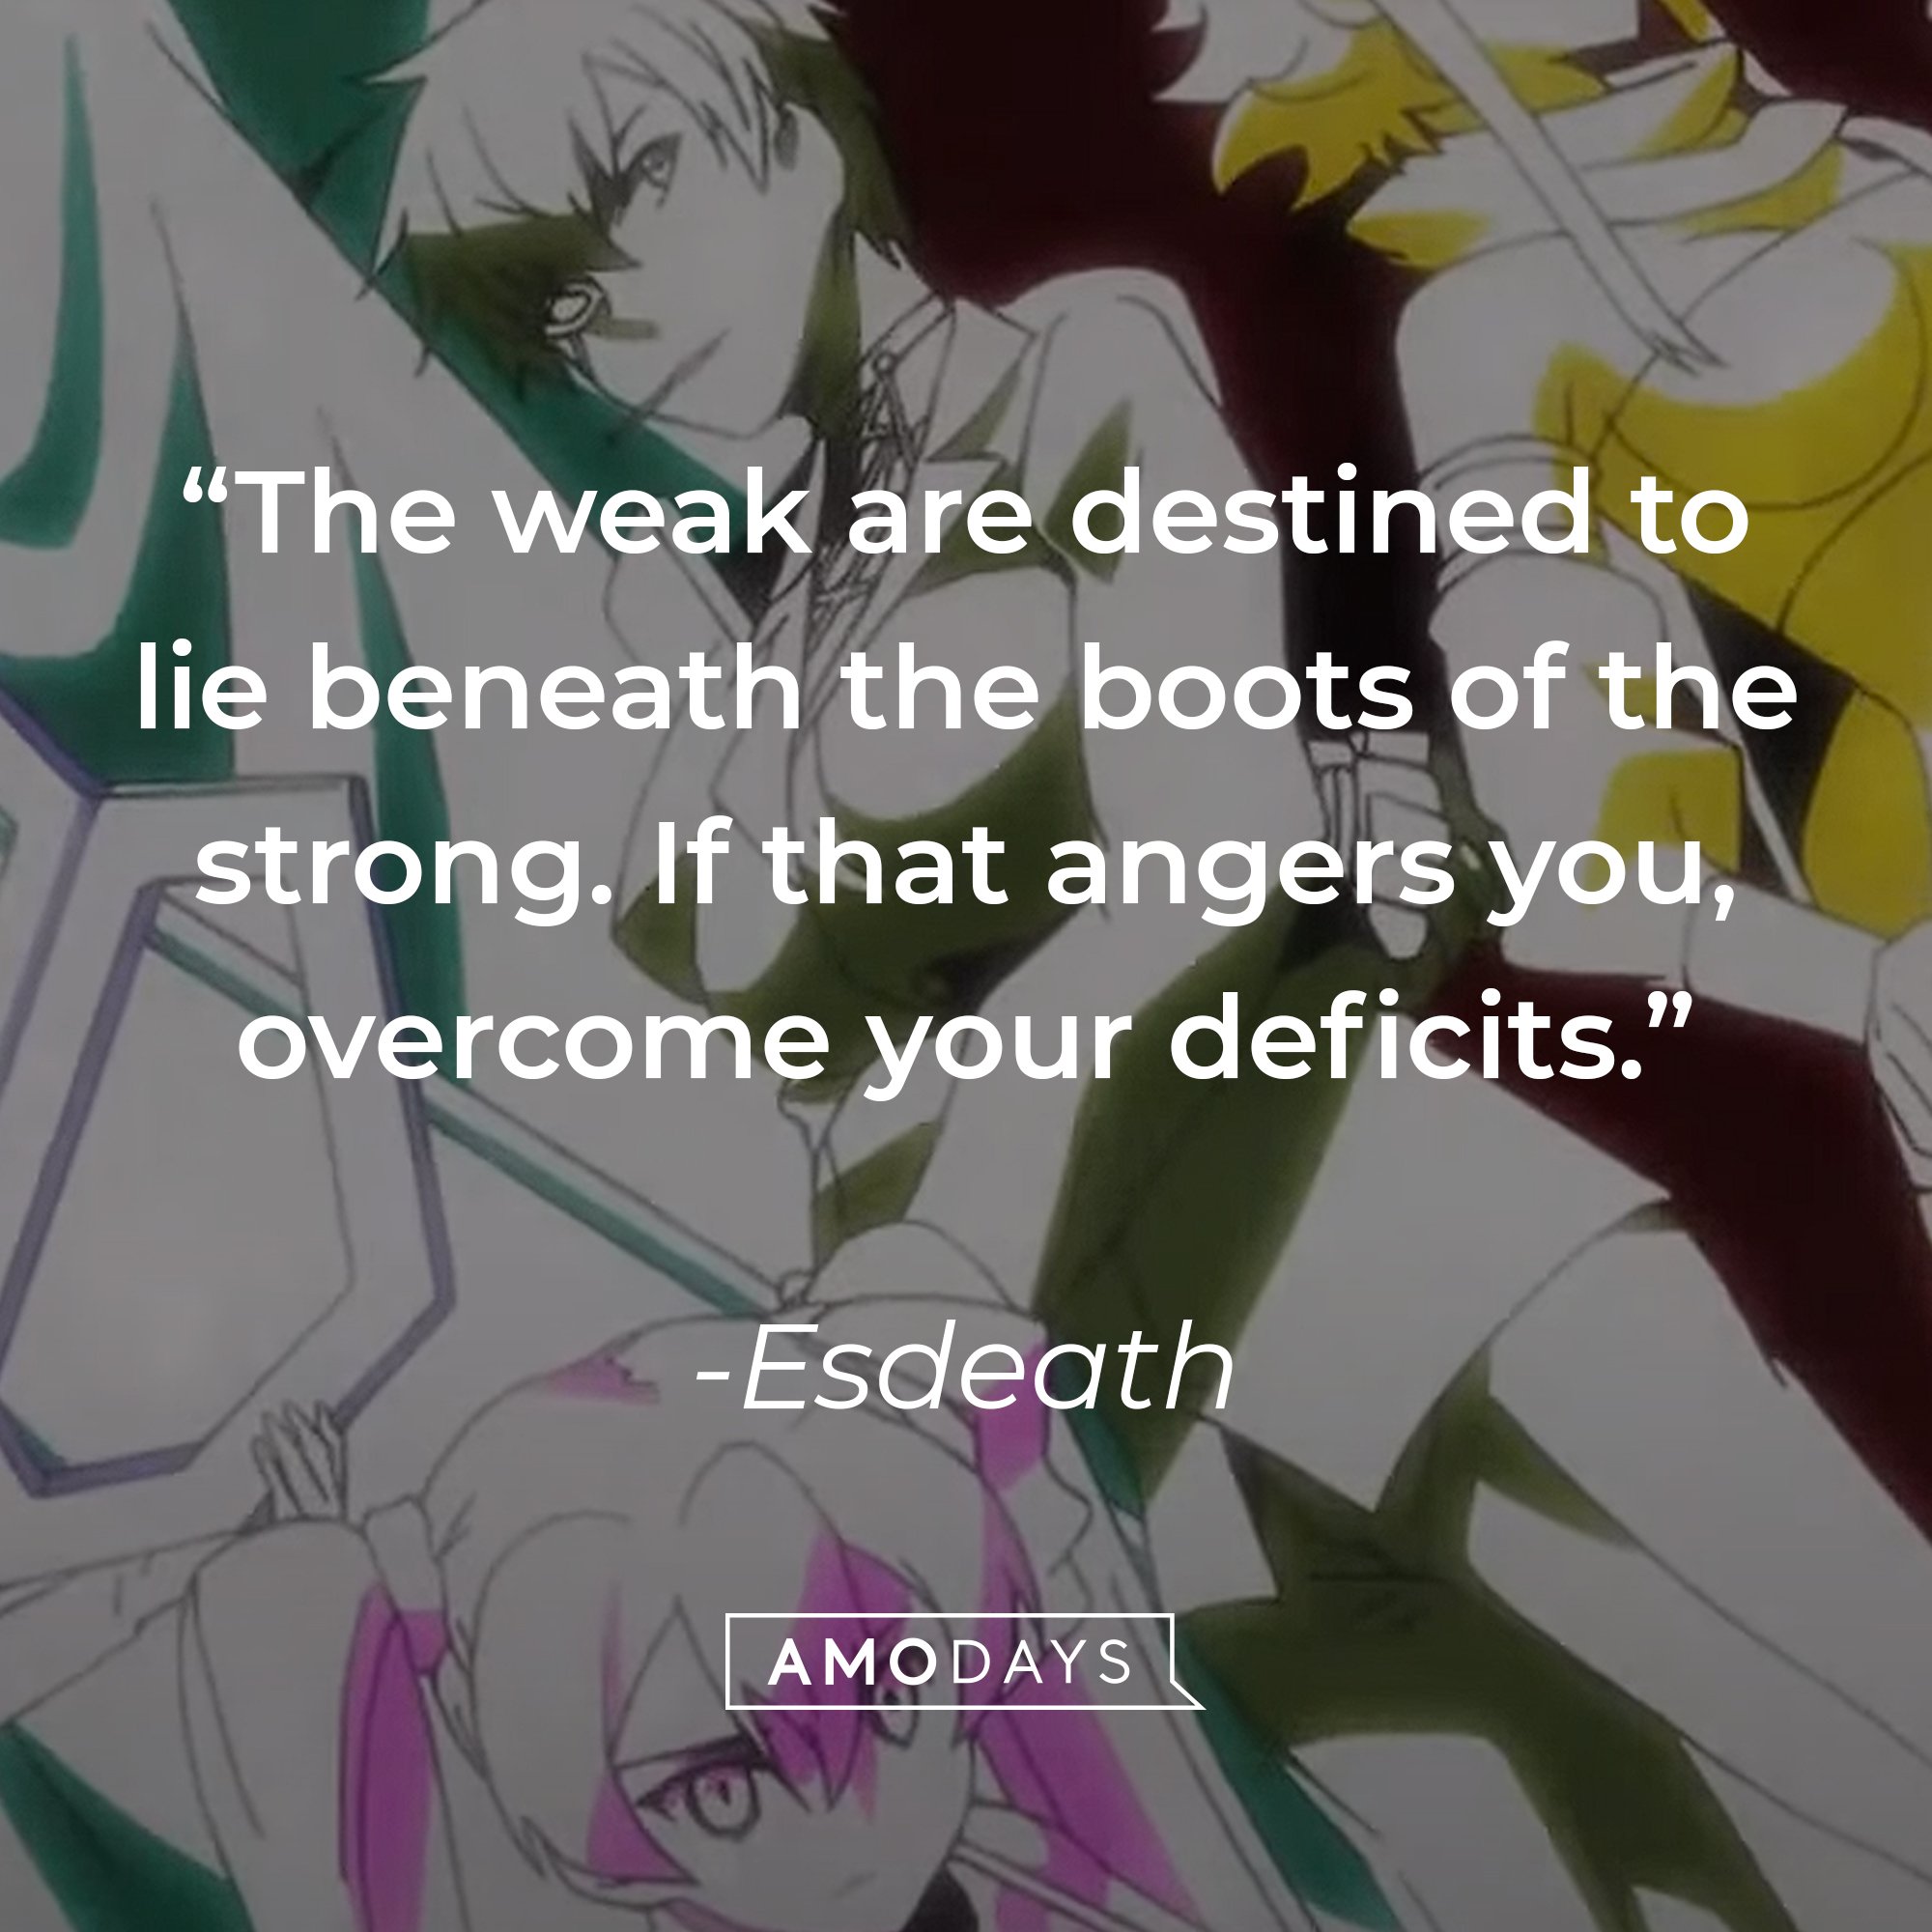 Esdeath’s quote: “The weak are destined to lie beneath the boots of the strong. If that angers you, overcome your deficits.” | Image: AmoDays